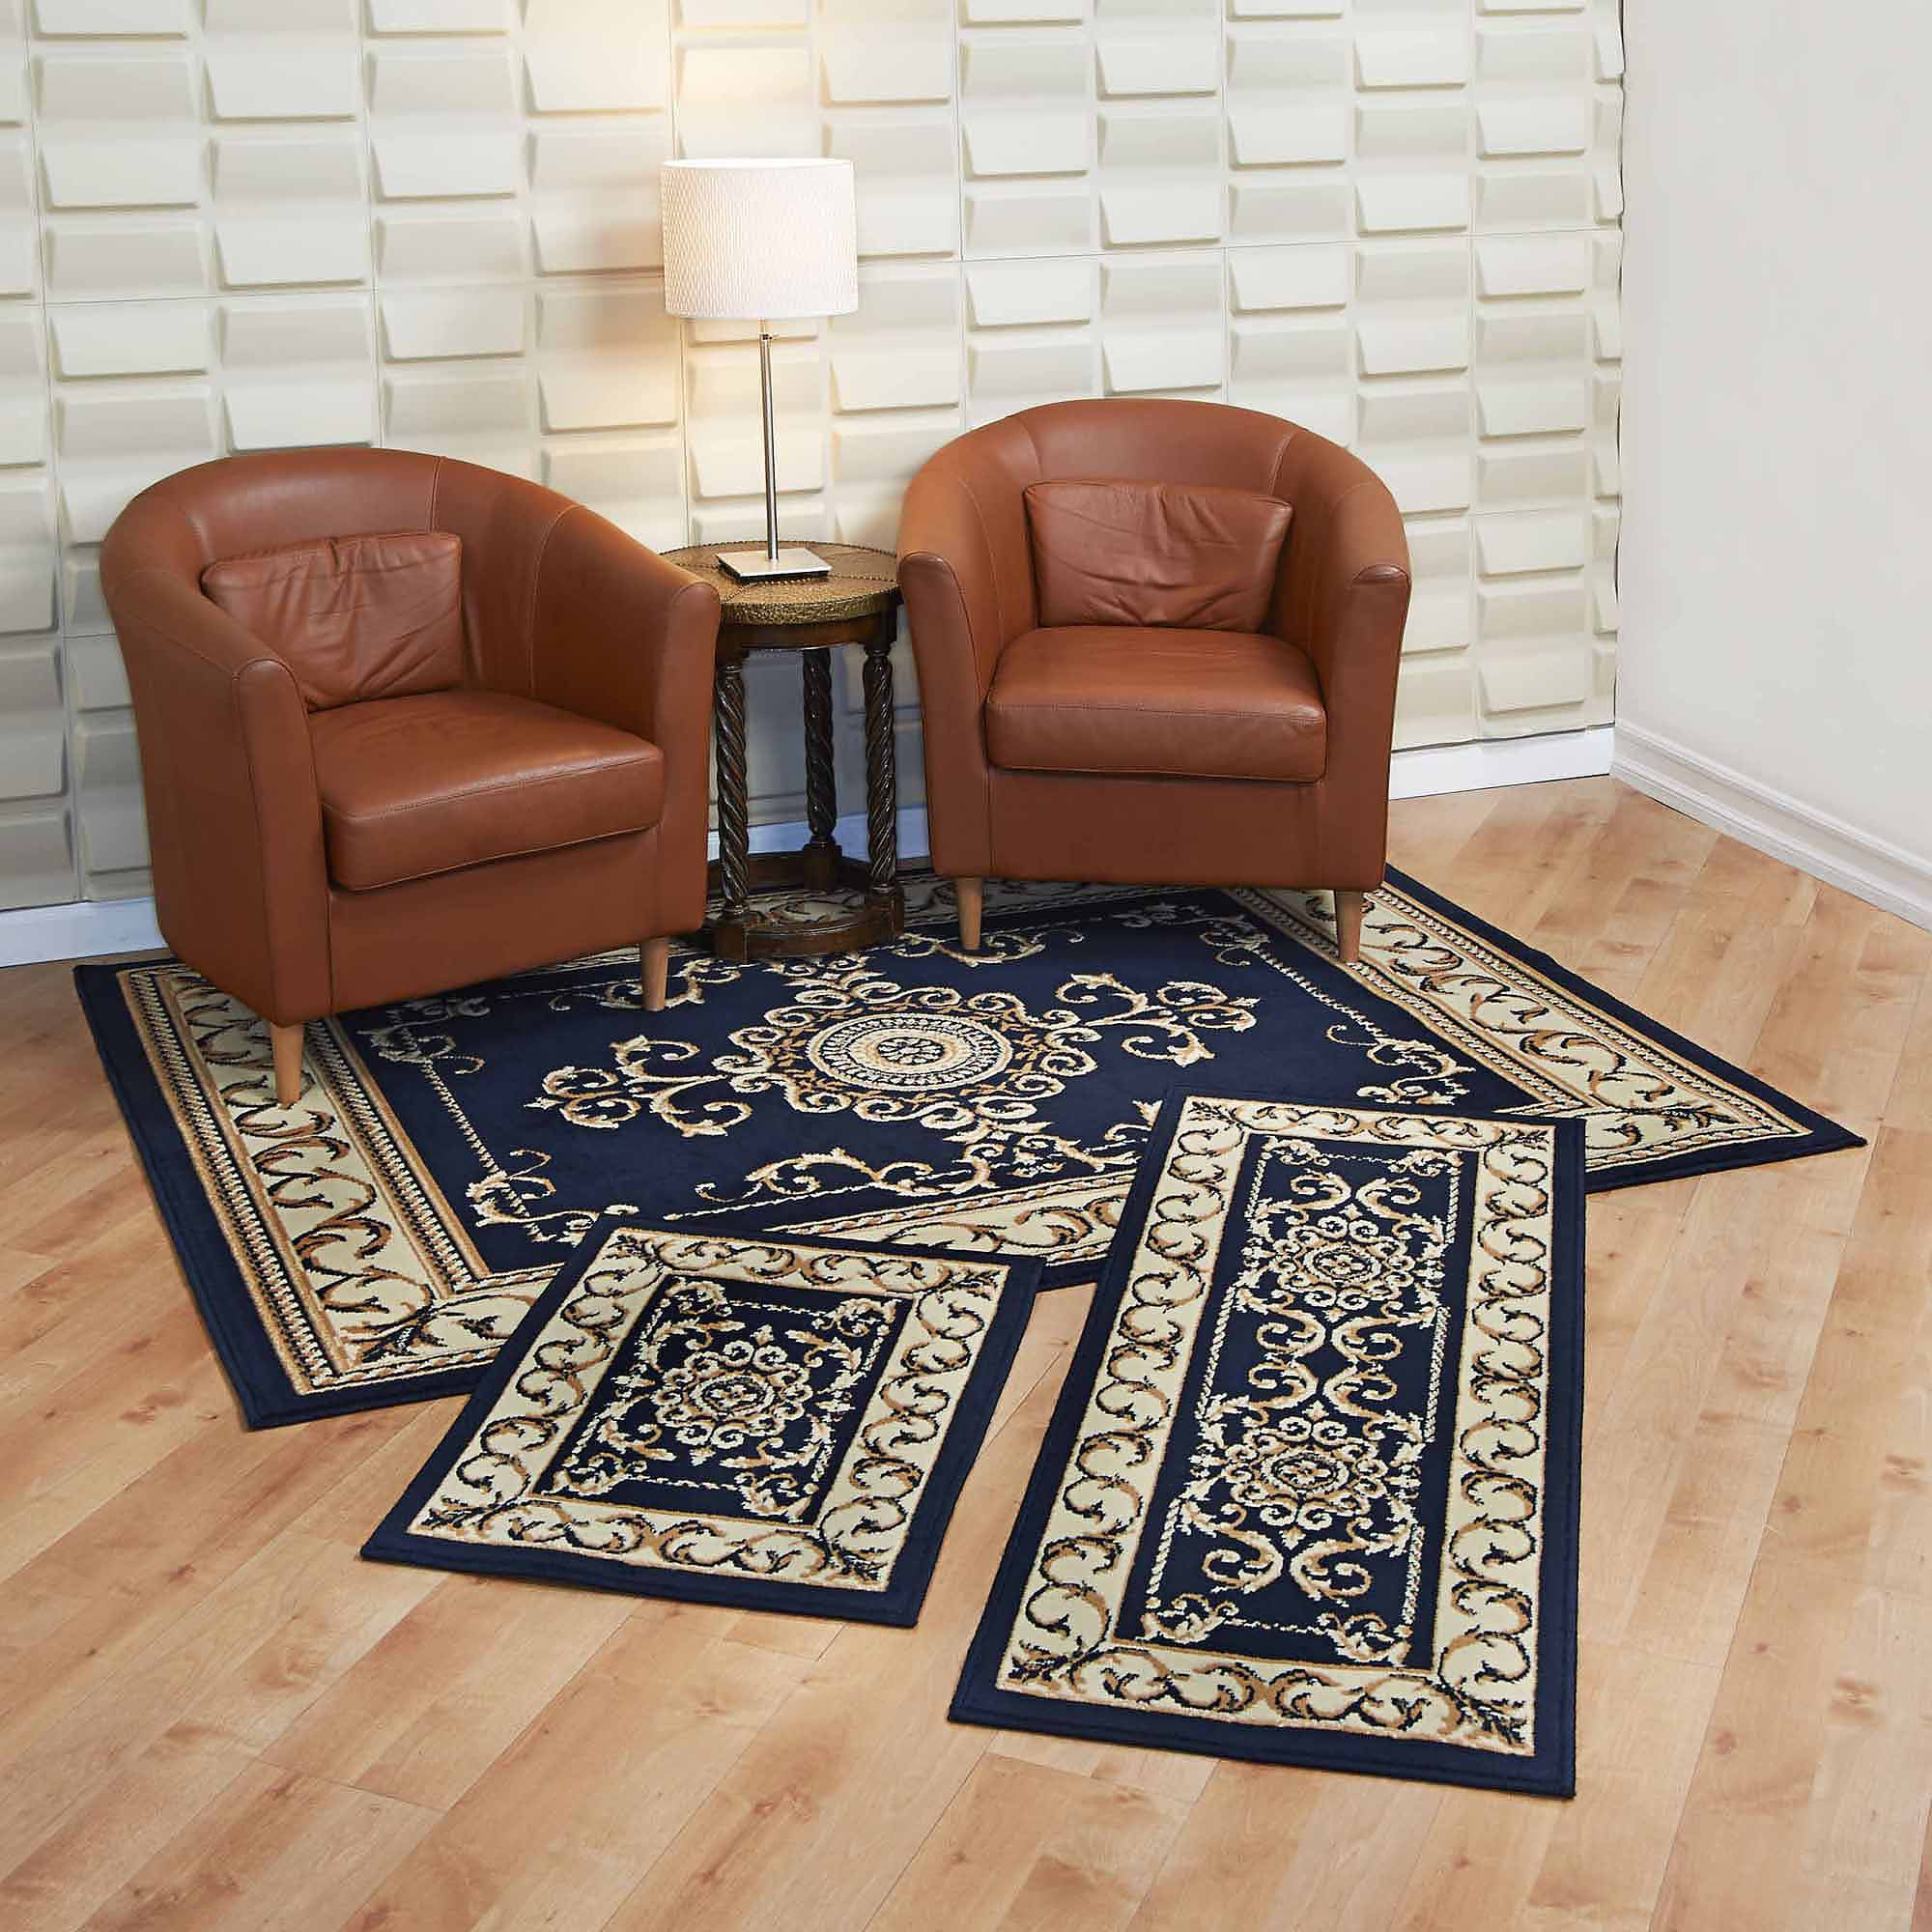 capri 3 piece rug set - royal crown - navy 3 piece capri area rug set  contains, 5'x7' area rug with matching 22"x59" runner and 22"x31" mat